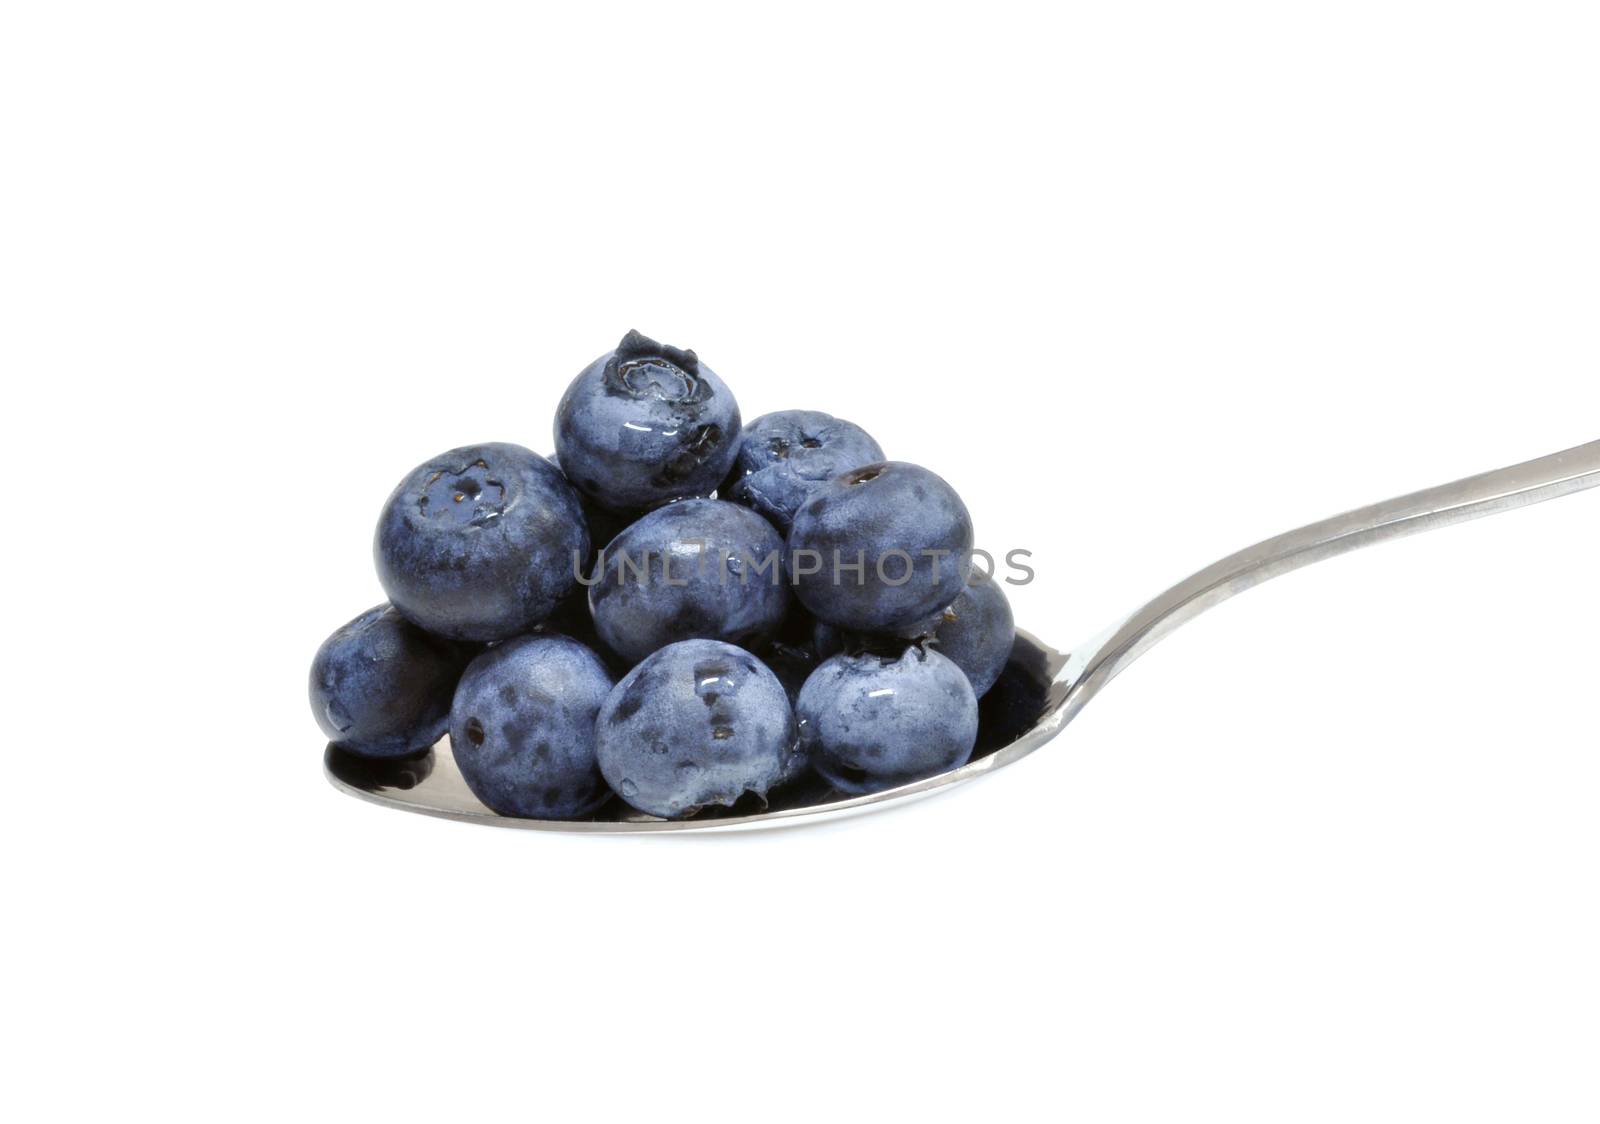 Spoonful of blueberries on a white background